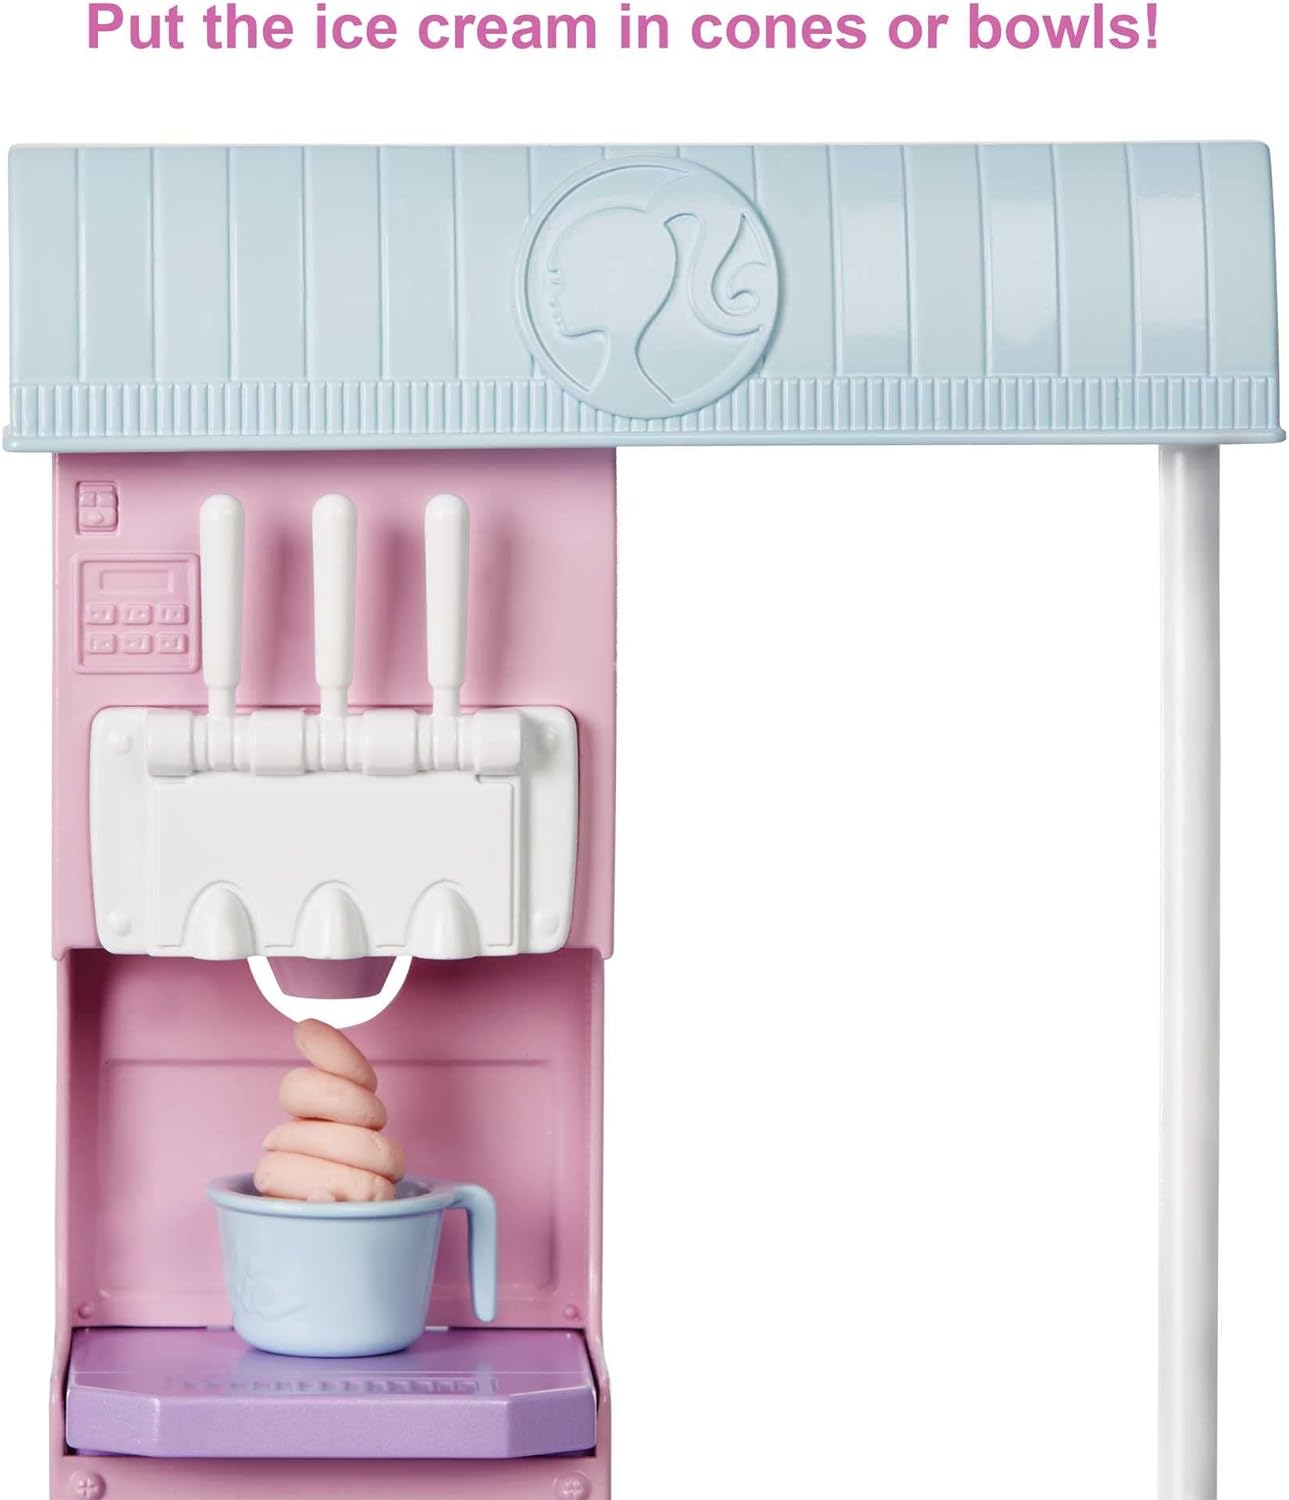 Barbie Careers Doll & Accessories, Ice Cream Shop Playset with Blonde Doll, Ice Cream Machine, Molds, Dough & More